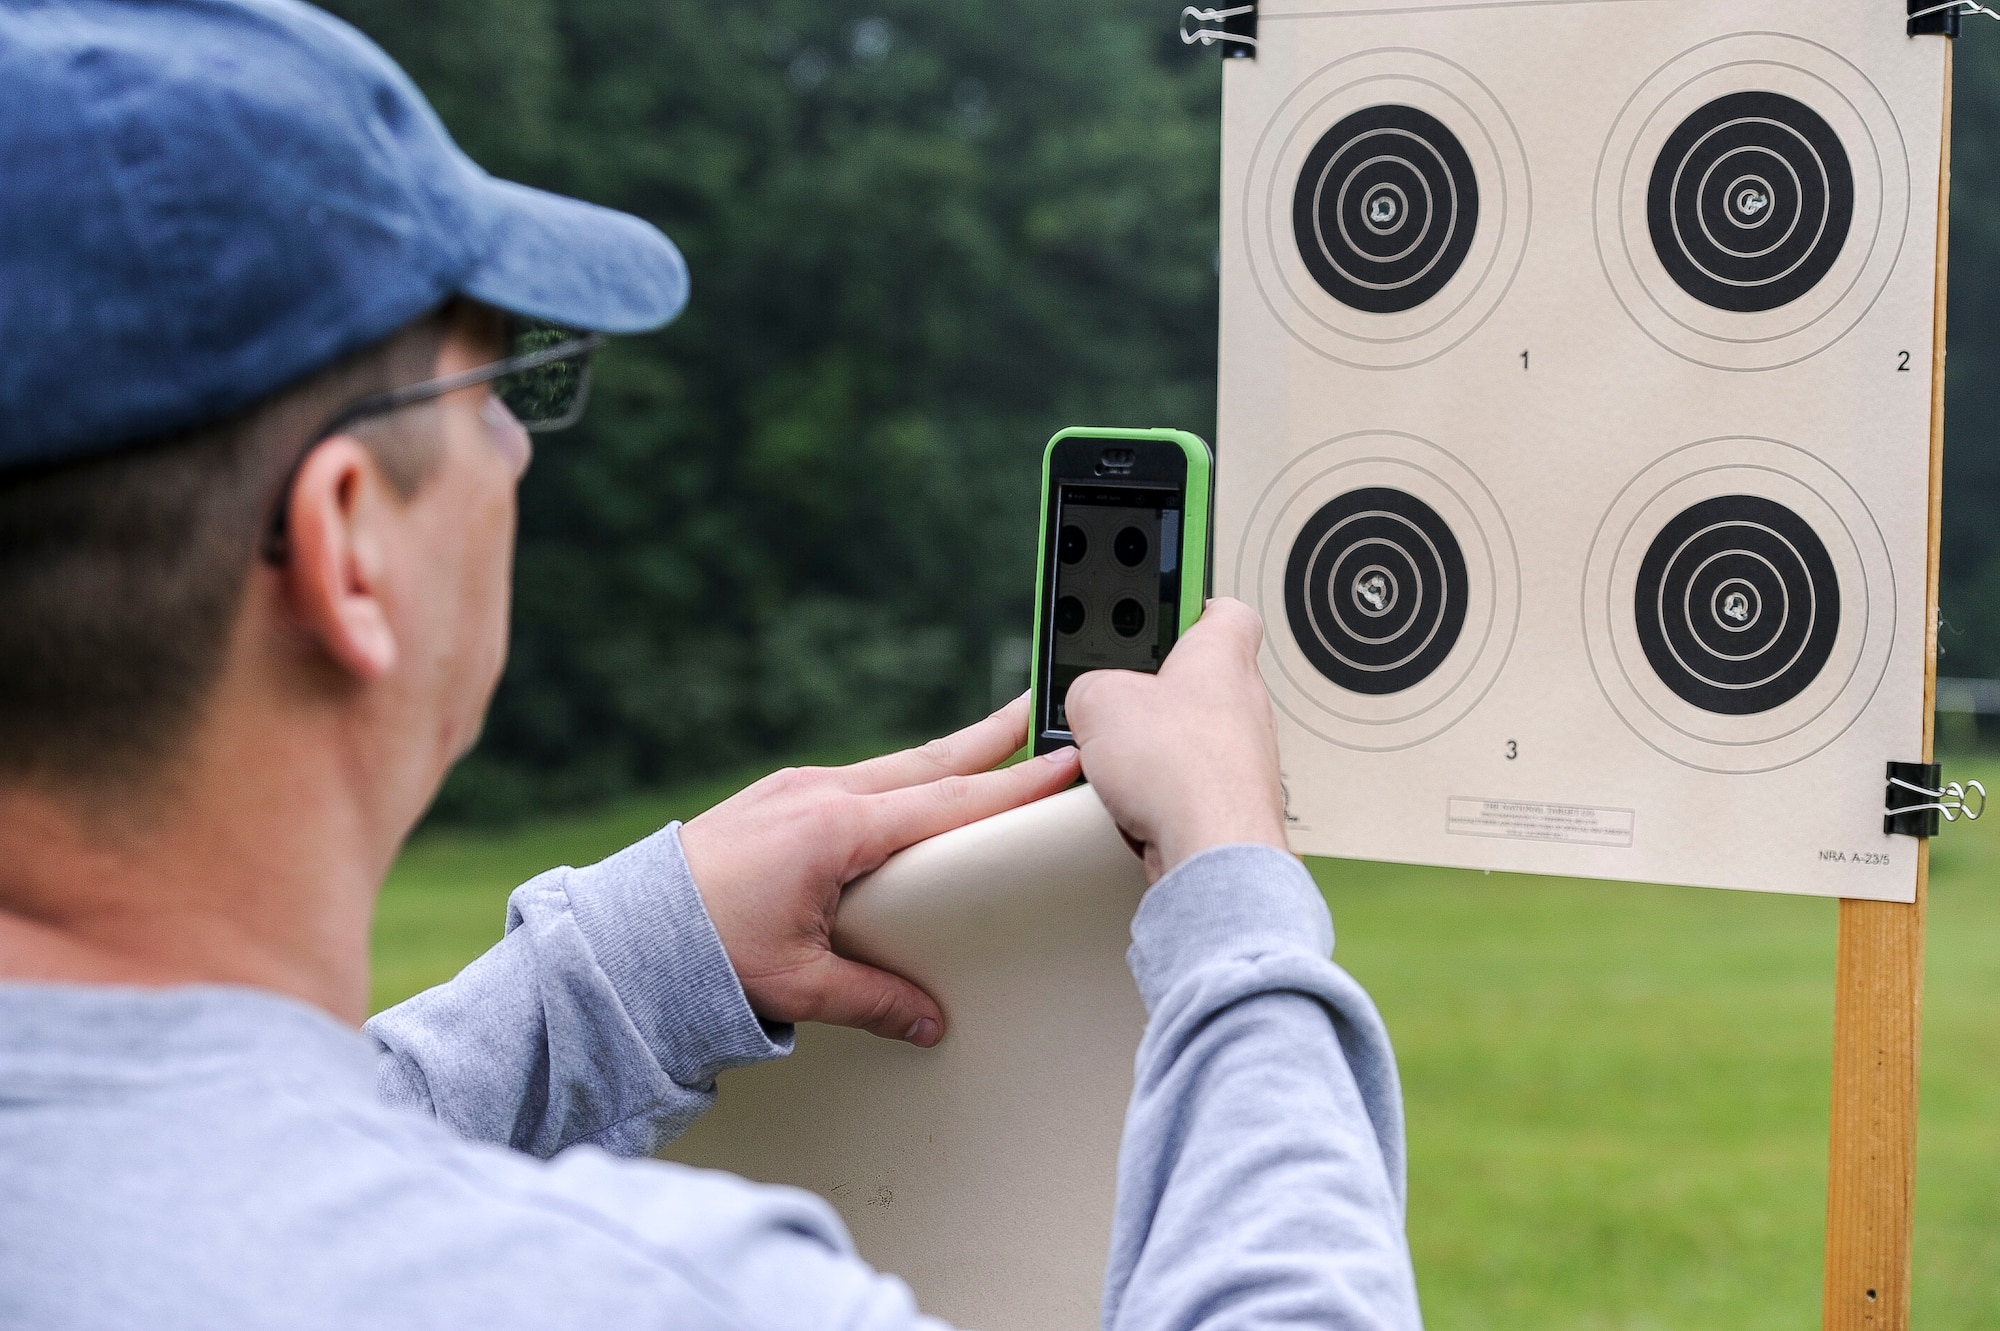 Lt. Col. Mark Gould takes a picture of his grouping as he admires his shots during a training class in New Freedom, Pa., June 26, 2015. Gould, a foreign liaison officer for the Defense Intelligence Agency’s Office of Partner Engagement at the Pentagon, has been involved in competitive shooting for the past 23 years and has been a member of the Air Force International Rifle Team for 17 years. (U.S. Air Force photo/Staff Sgt. Christopher Gross)